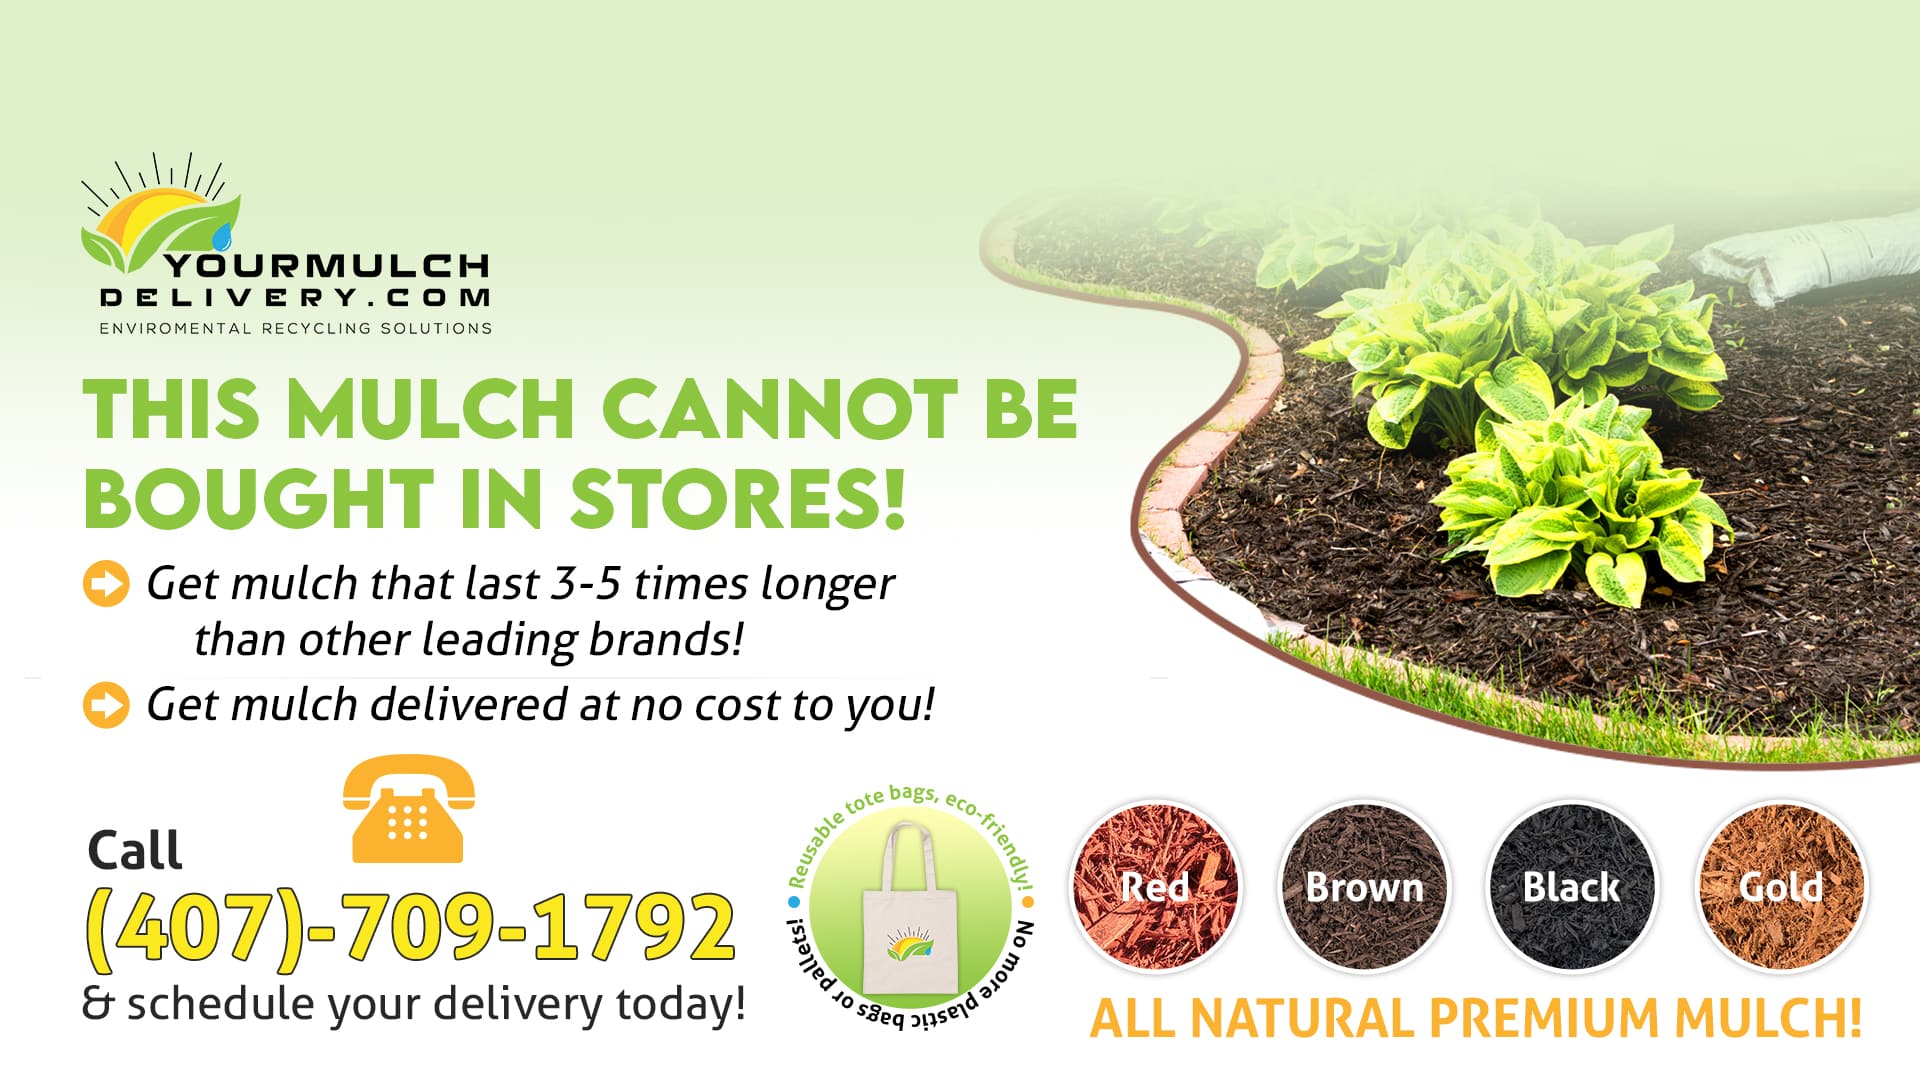 EXCLUSIVE MULCH DELIVERY